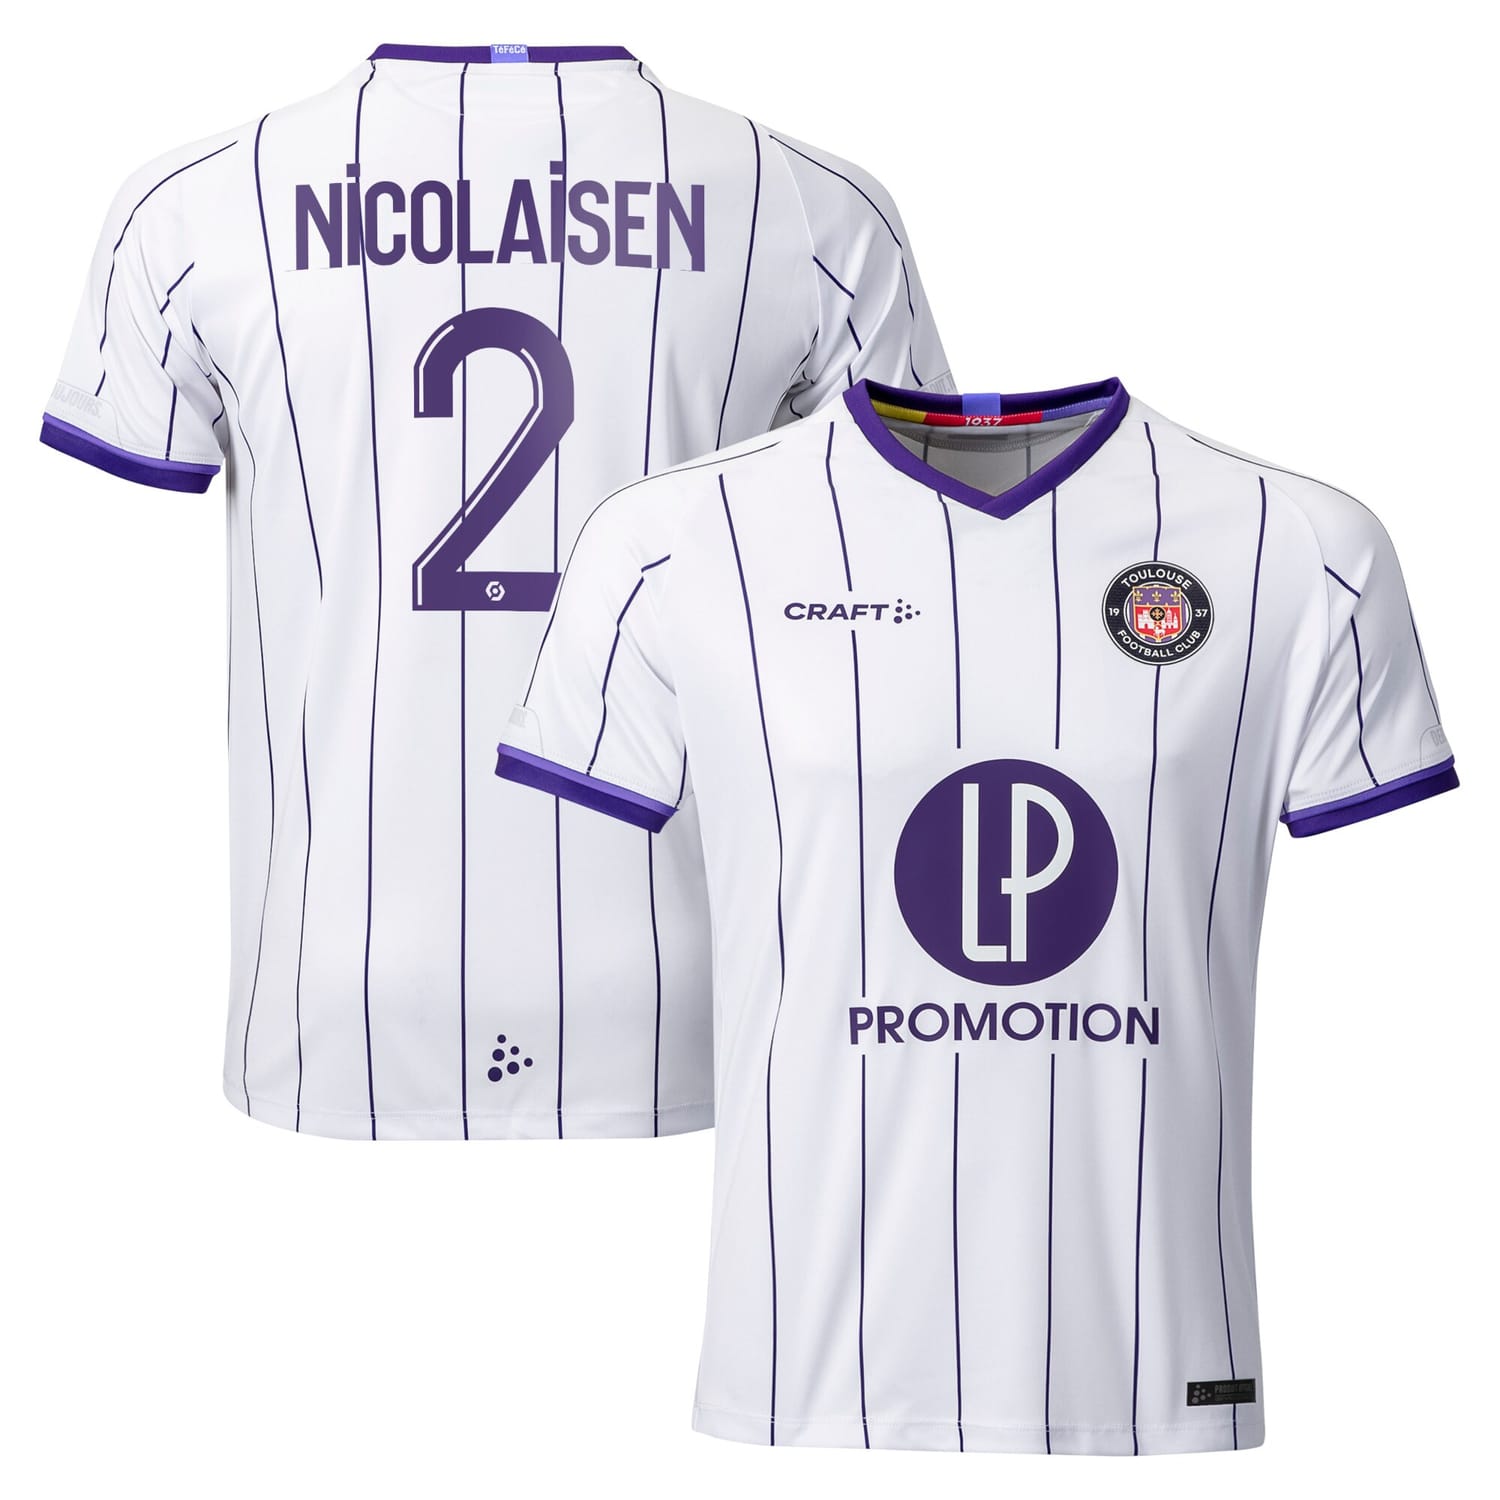 Ligue 1 Toulouse Home Jersey Shirt 2022-23 player Rasmus Nicolaisen 2 printing for Men